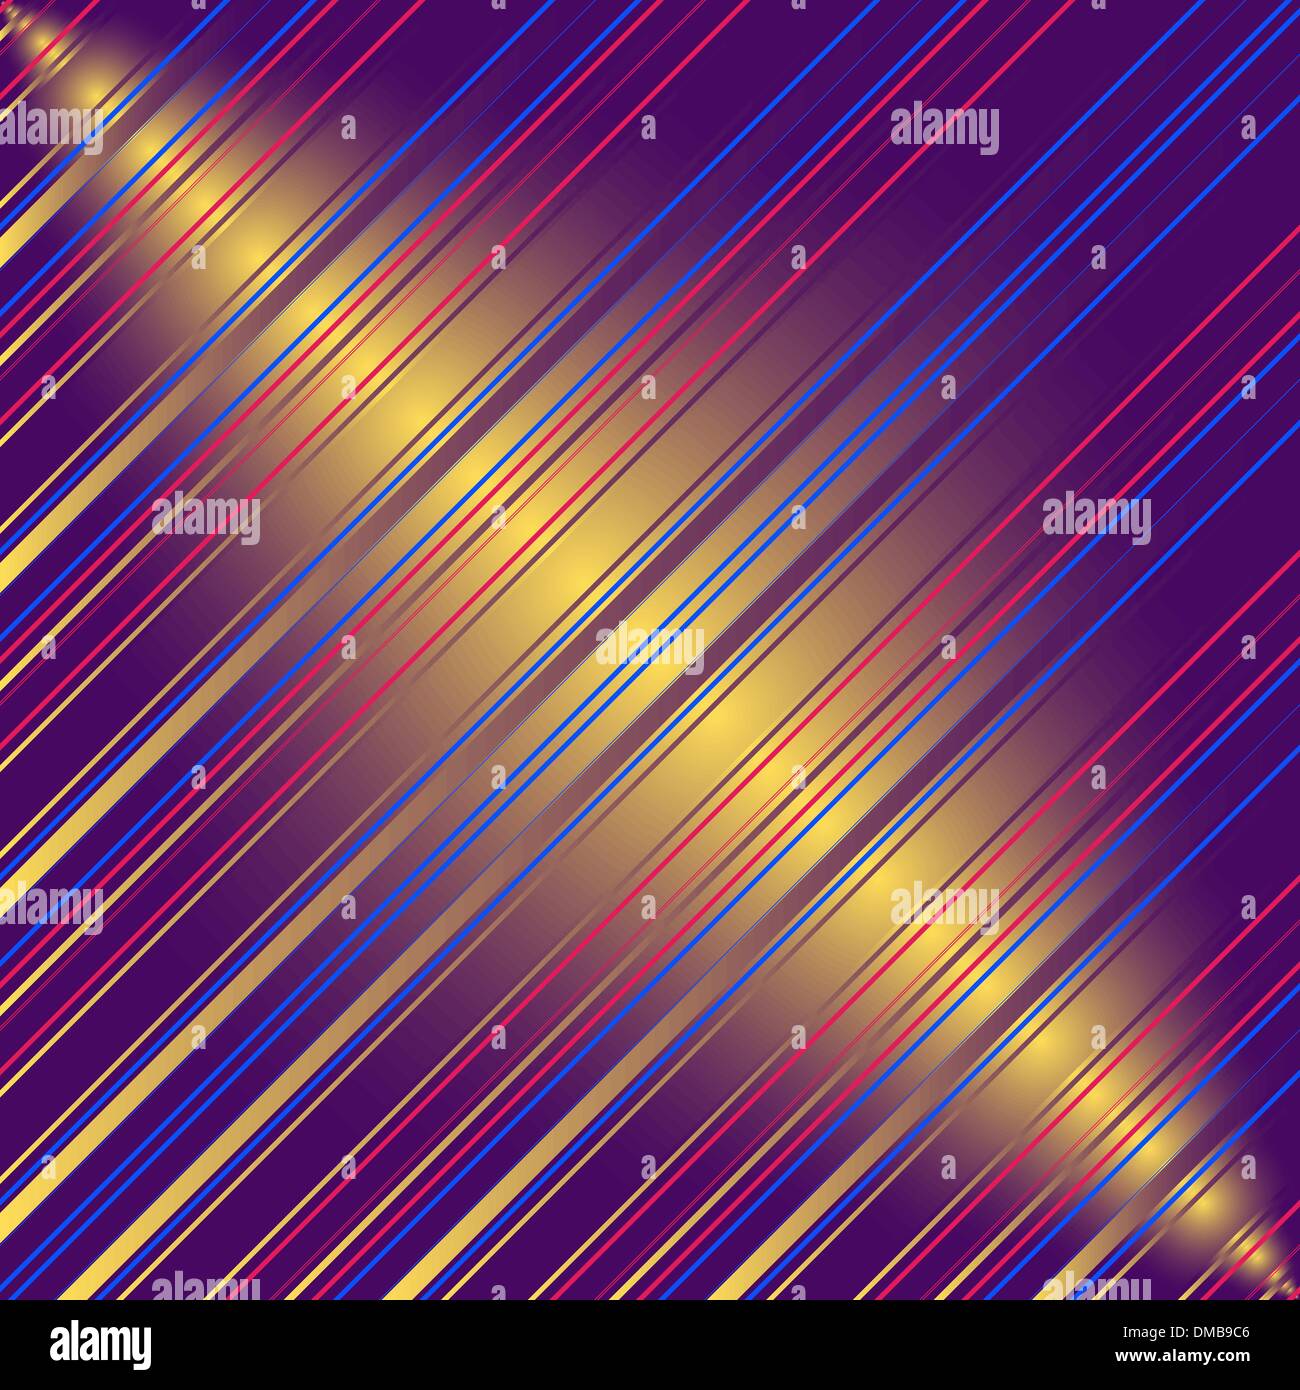 Diagonal striped background Stock Vector